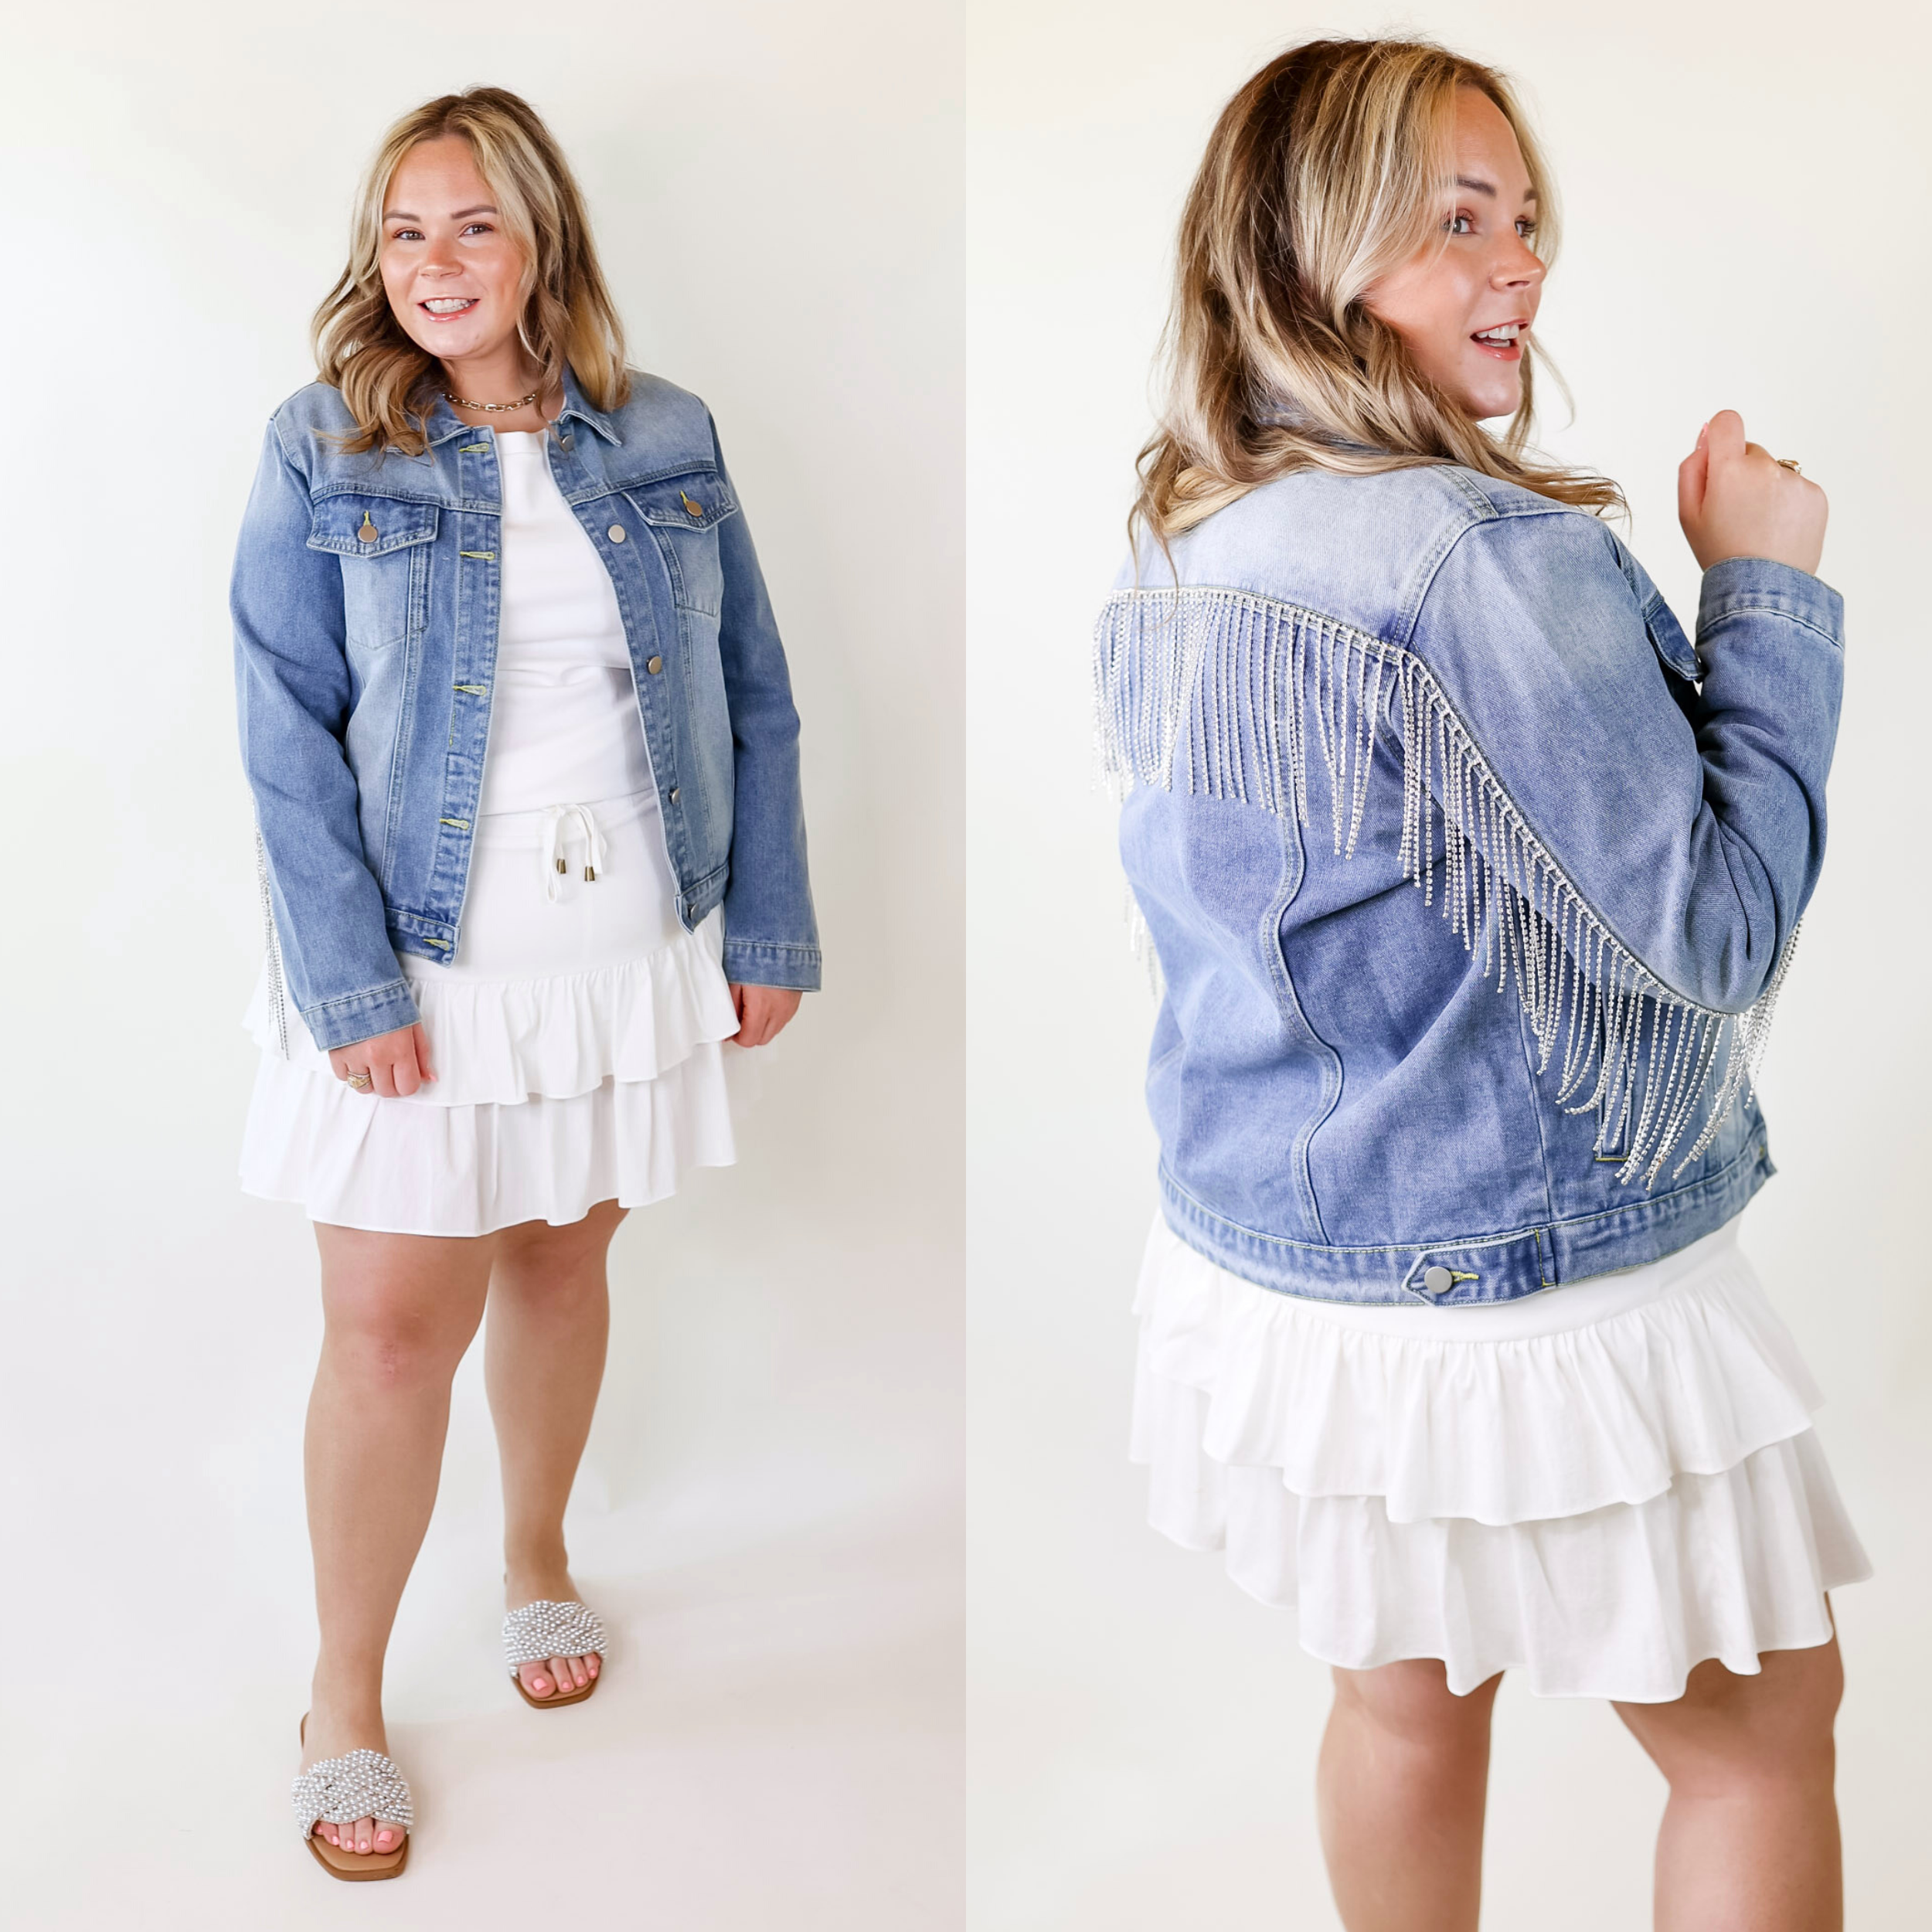 Model is wearing a medium wash button up denim jacket featuring two front pockets, a collar, and crystal fringe lining the upper back and arm.